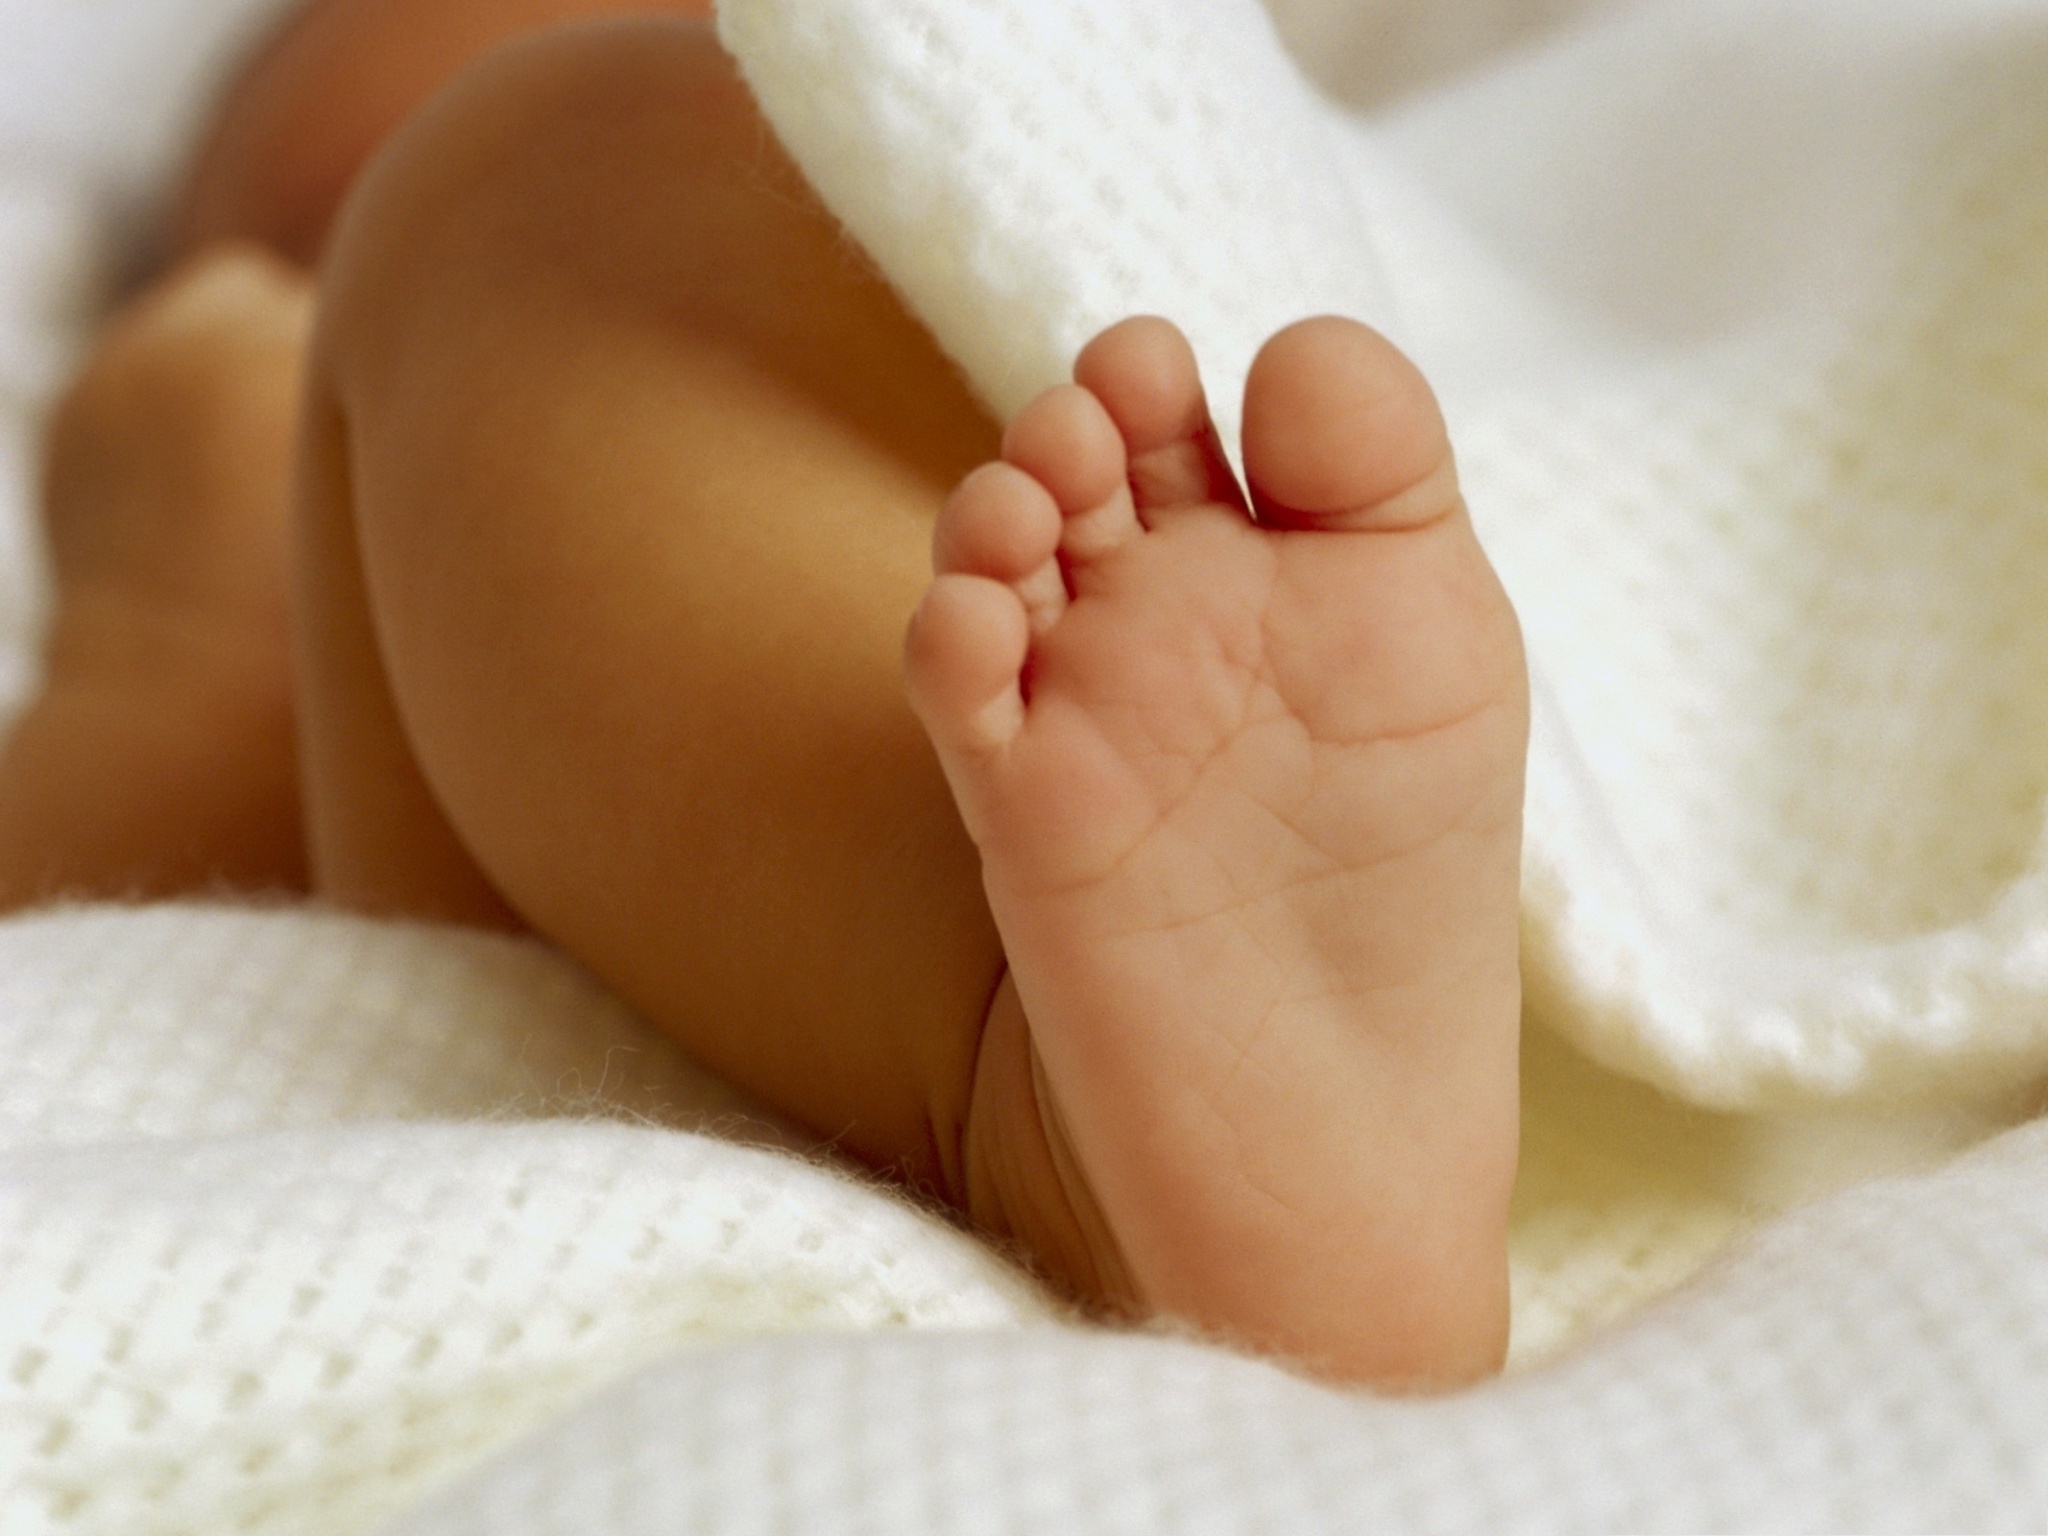 Baby Foot Portrait, Cute Baby with Soft Feet, Can't Help Touching--2048X1536 free wallpaper download